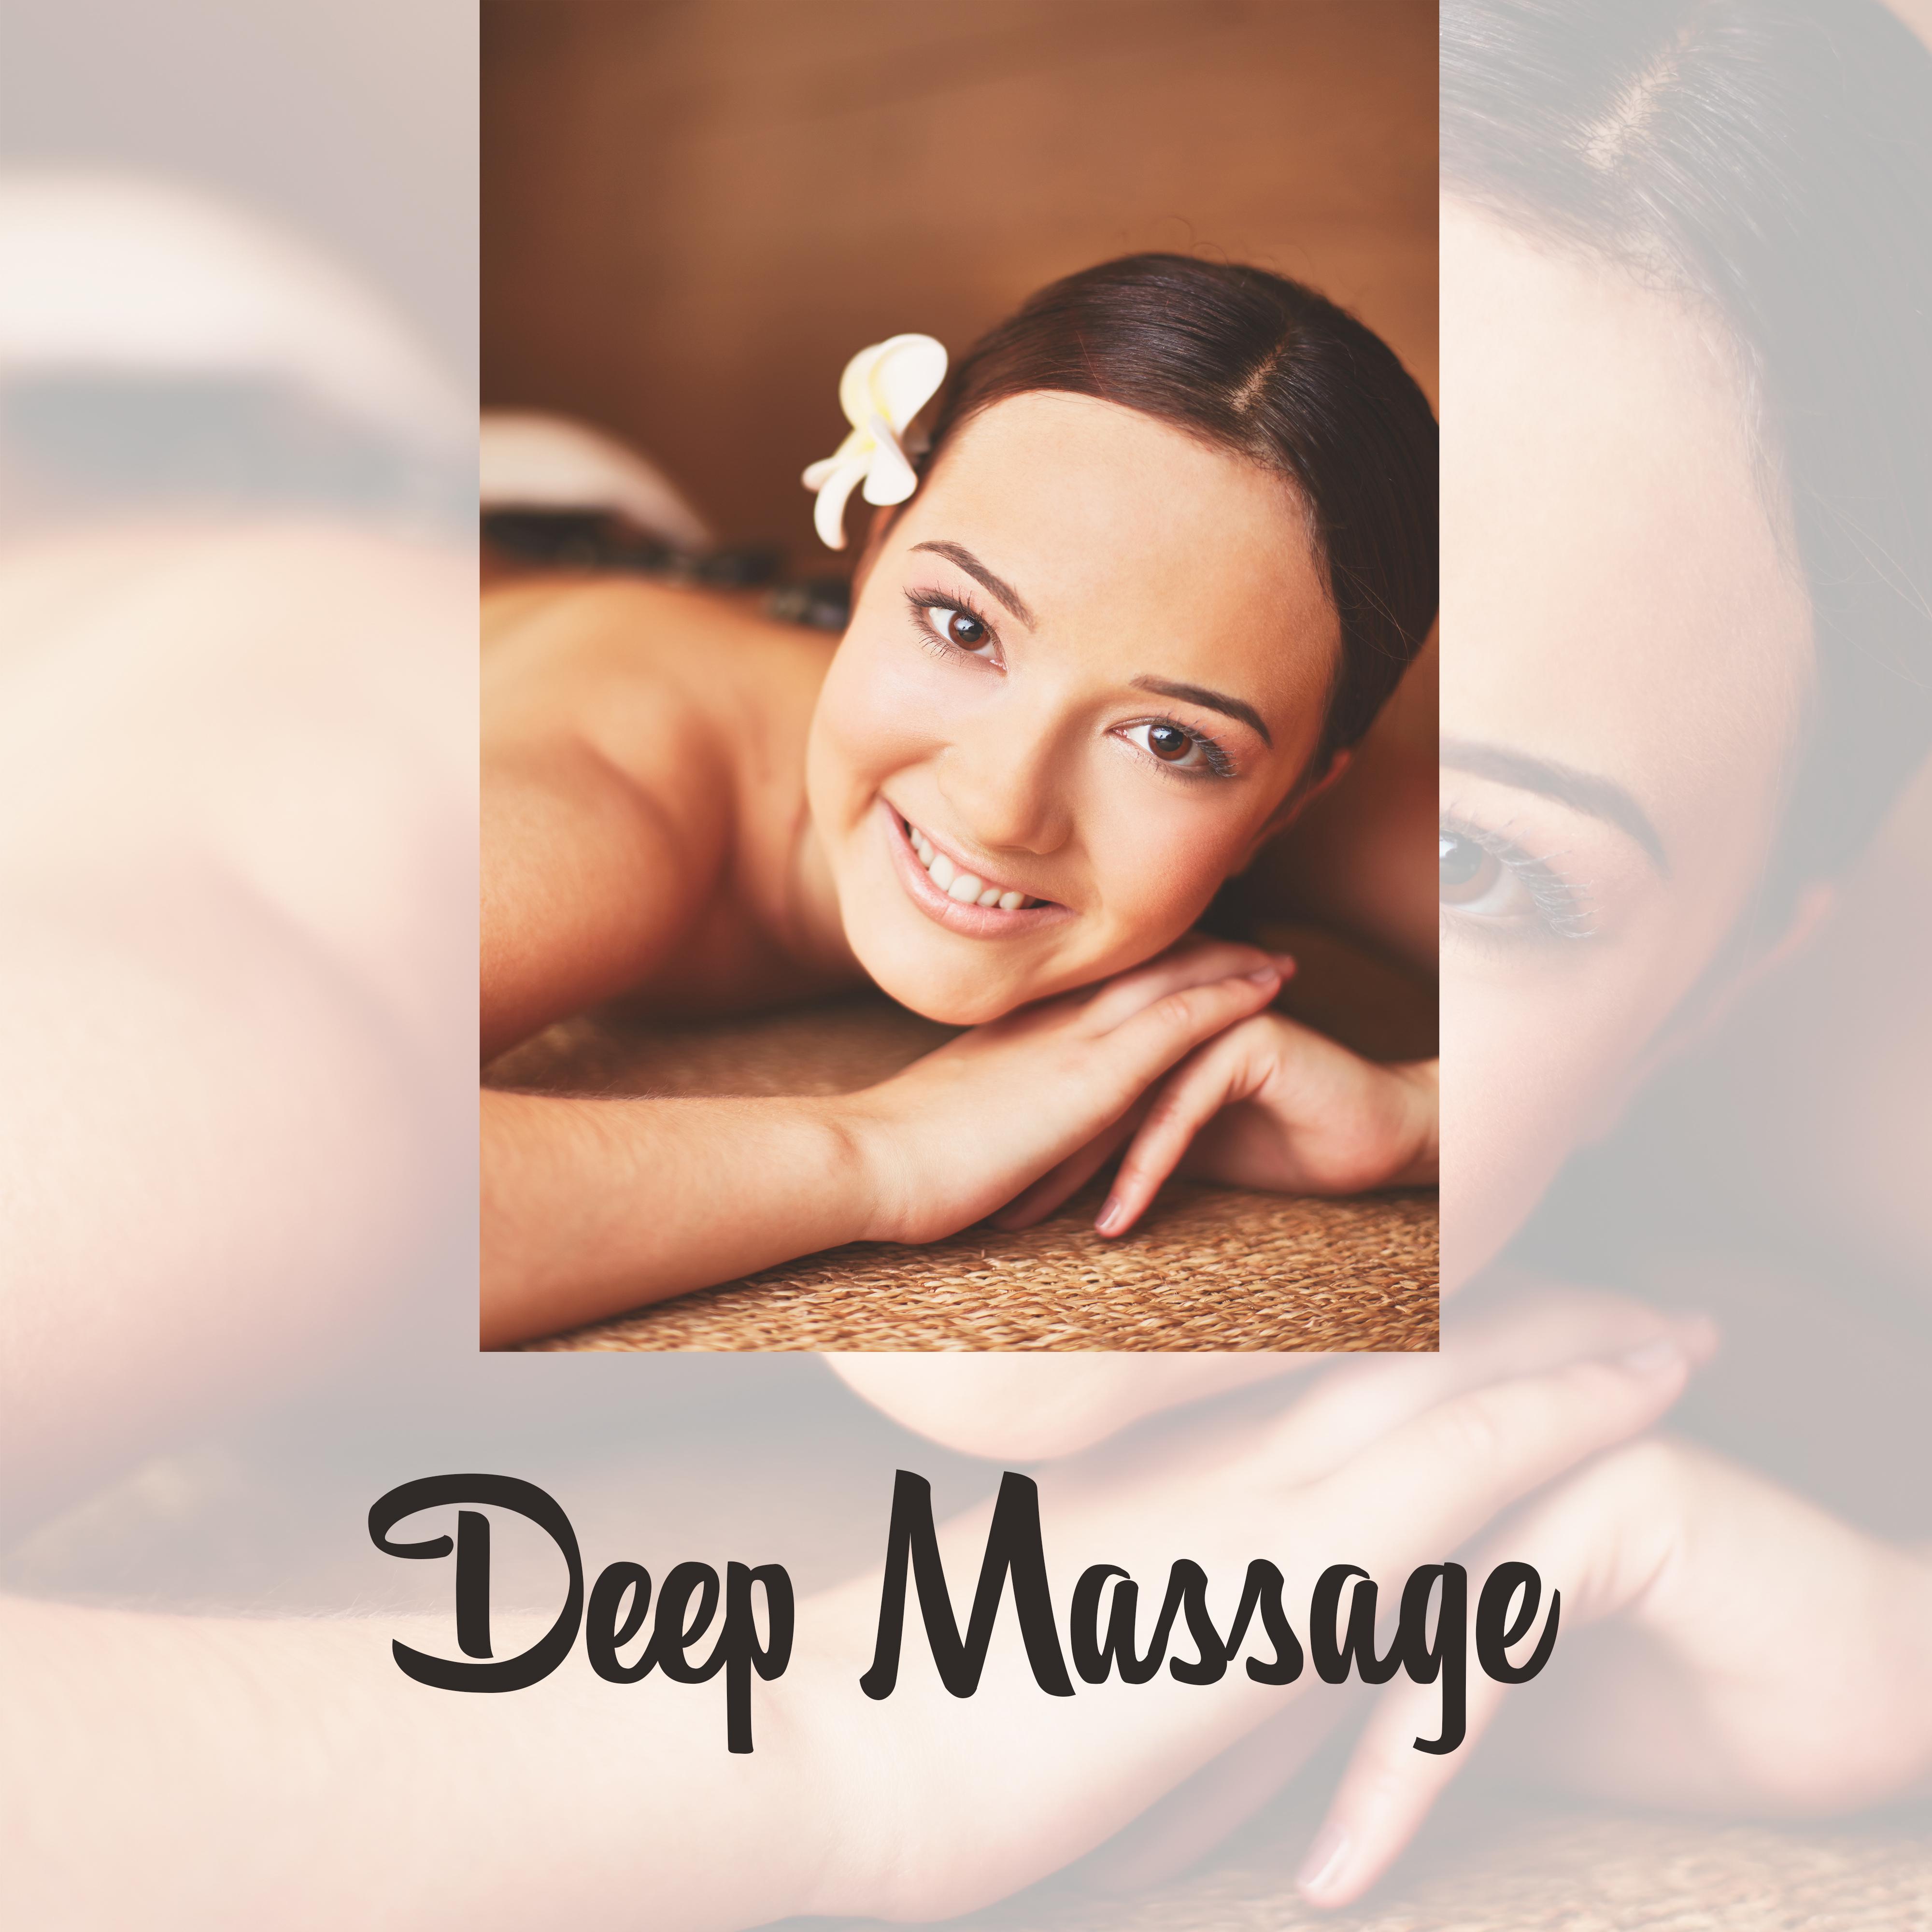 Deep Massage – Zen Music, Relaxing Therapy for Wellness, Soft Spa Music, Anti Stress Music, Pure Spa, Peaceful Mind, Calming Nature Sounds for Relaxation, Rest